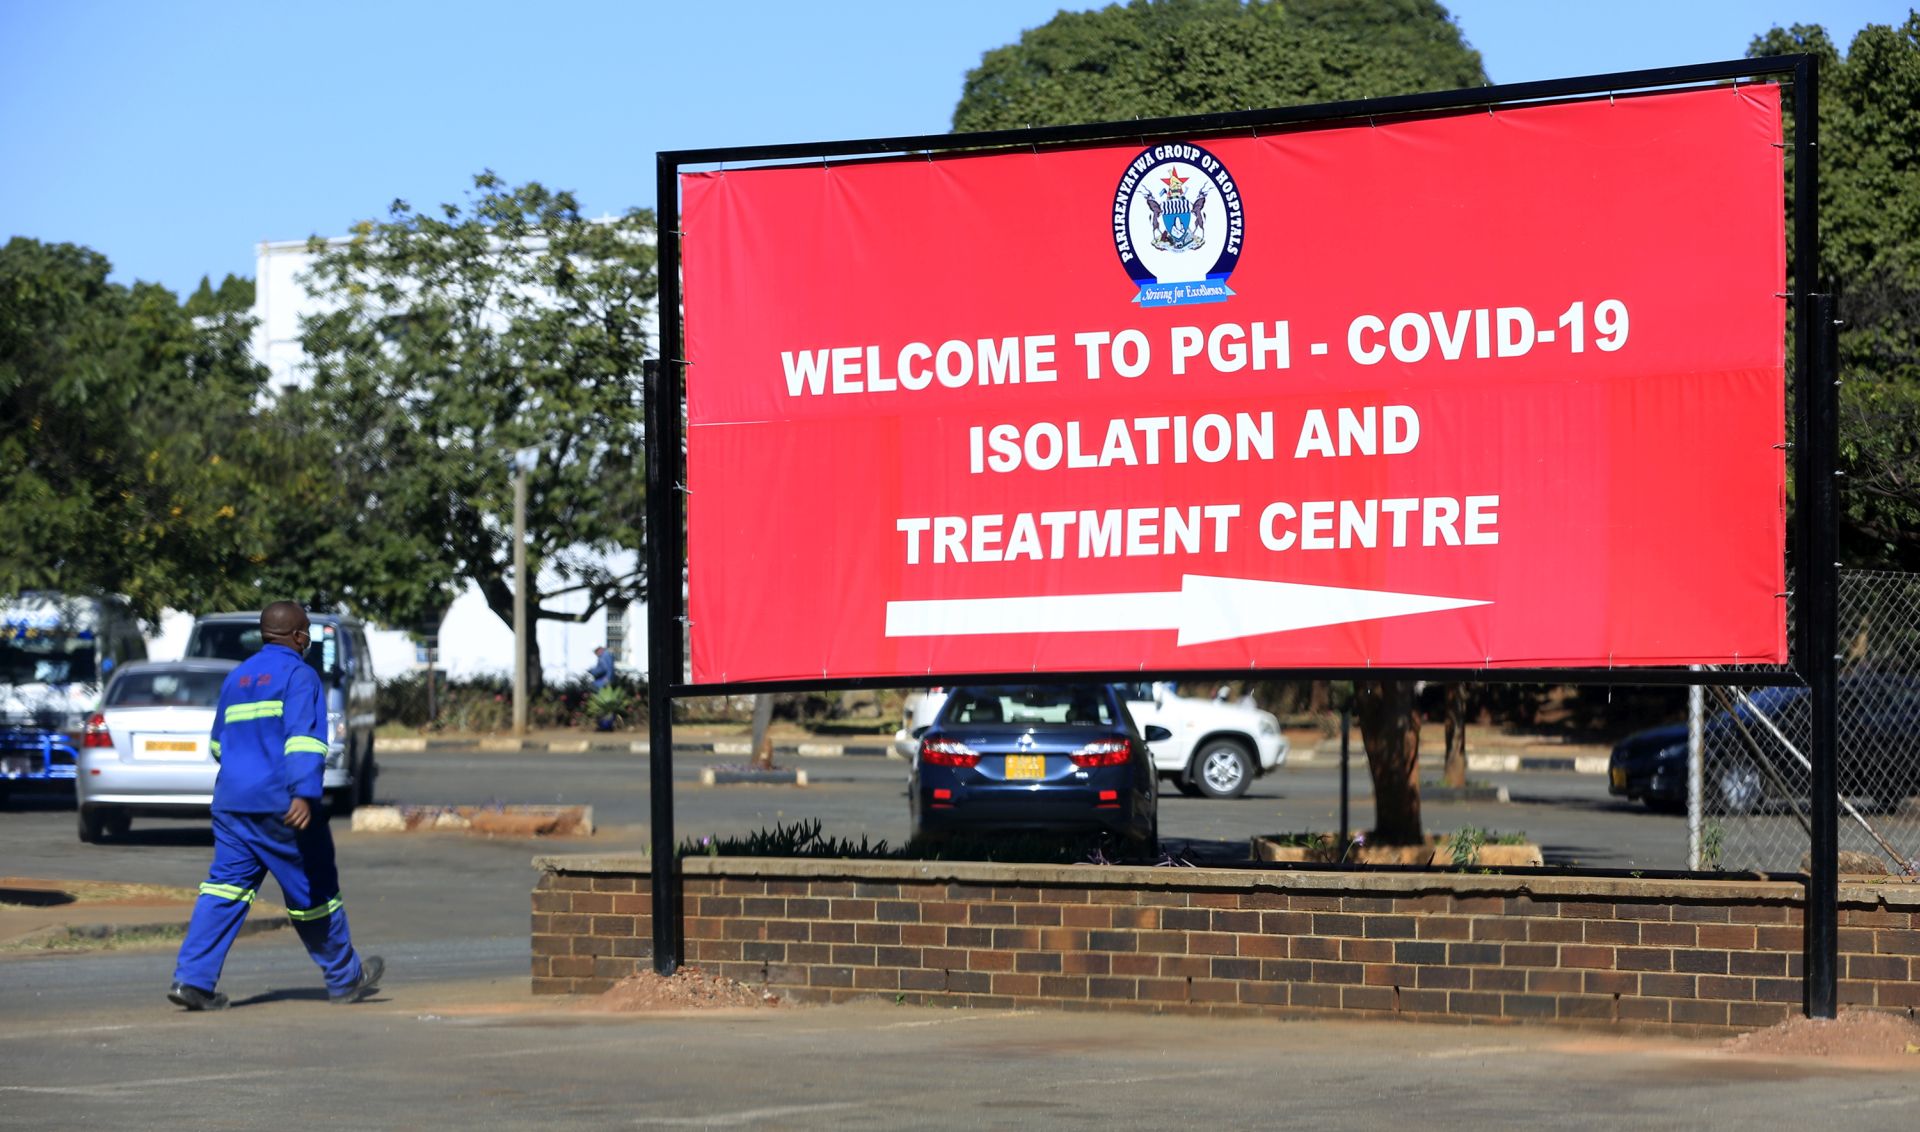 epa08547495 A man walks past a billboard pointing to a COVID-19 treatment centre at Parirenyatwa Hospital in Harare, Zimbabwe, 15 July 2020. President Emmerson Mnangagwa has said he will soon announce new lockdown measures to further curb the spread of the disease.  EPA/AARON UFUMELI